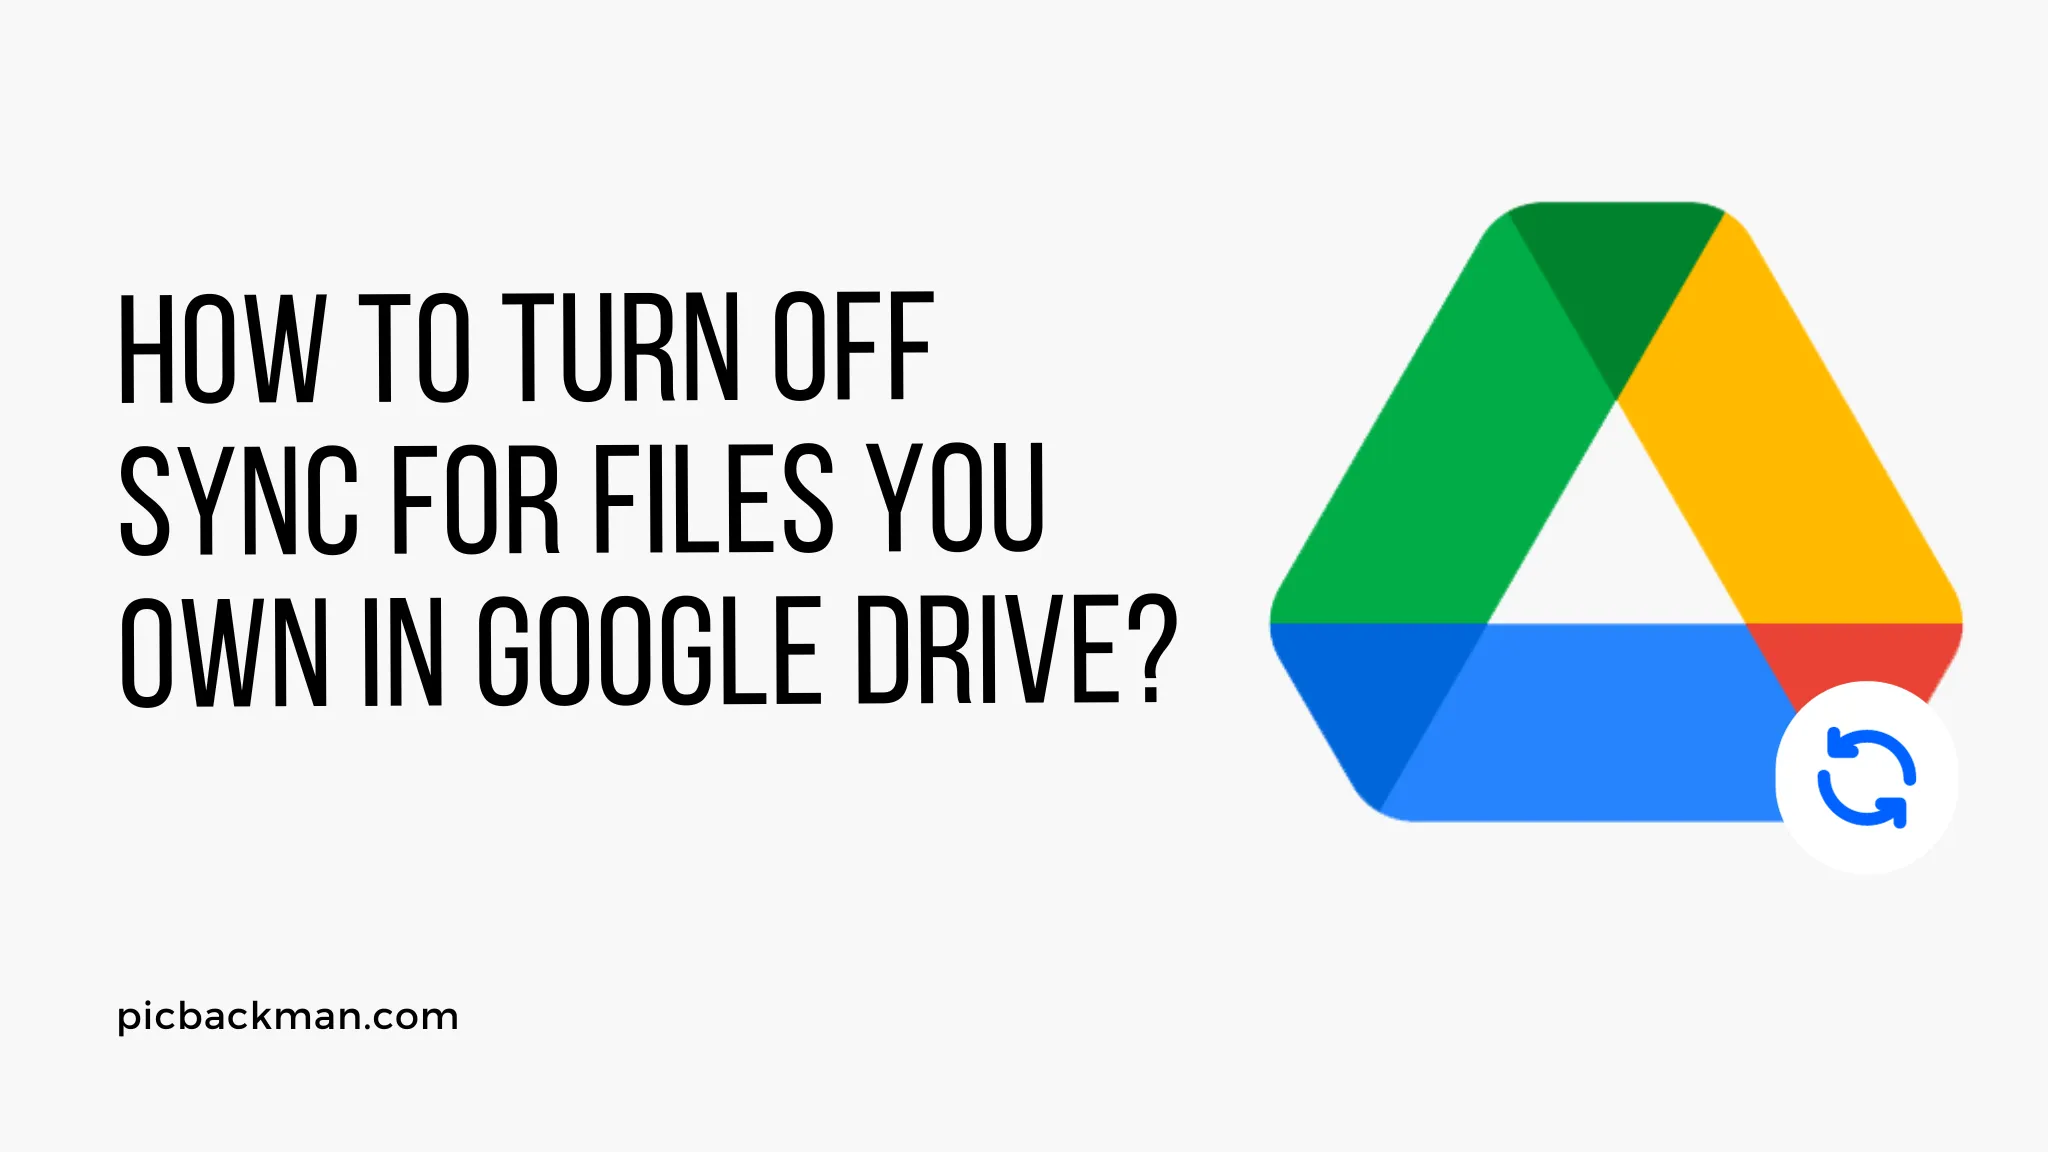 How to Turn OFF Sync for Files you own in Google Drive?